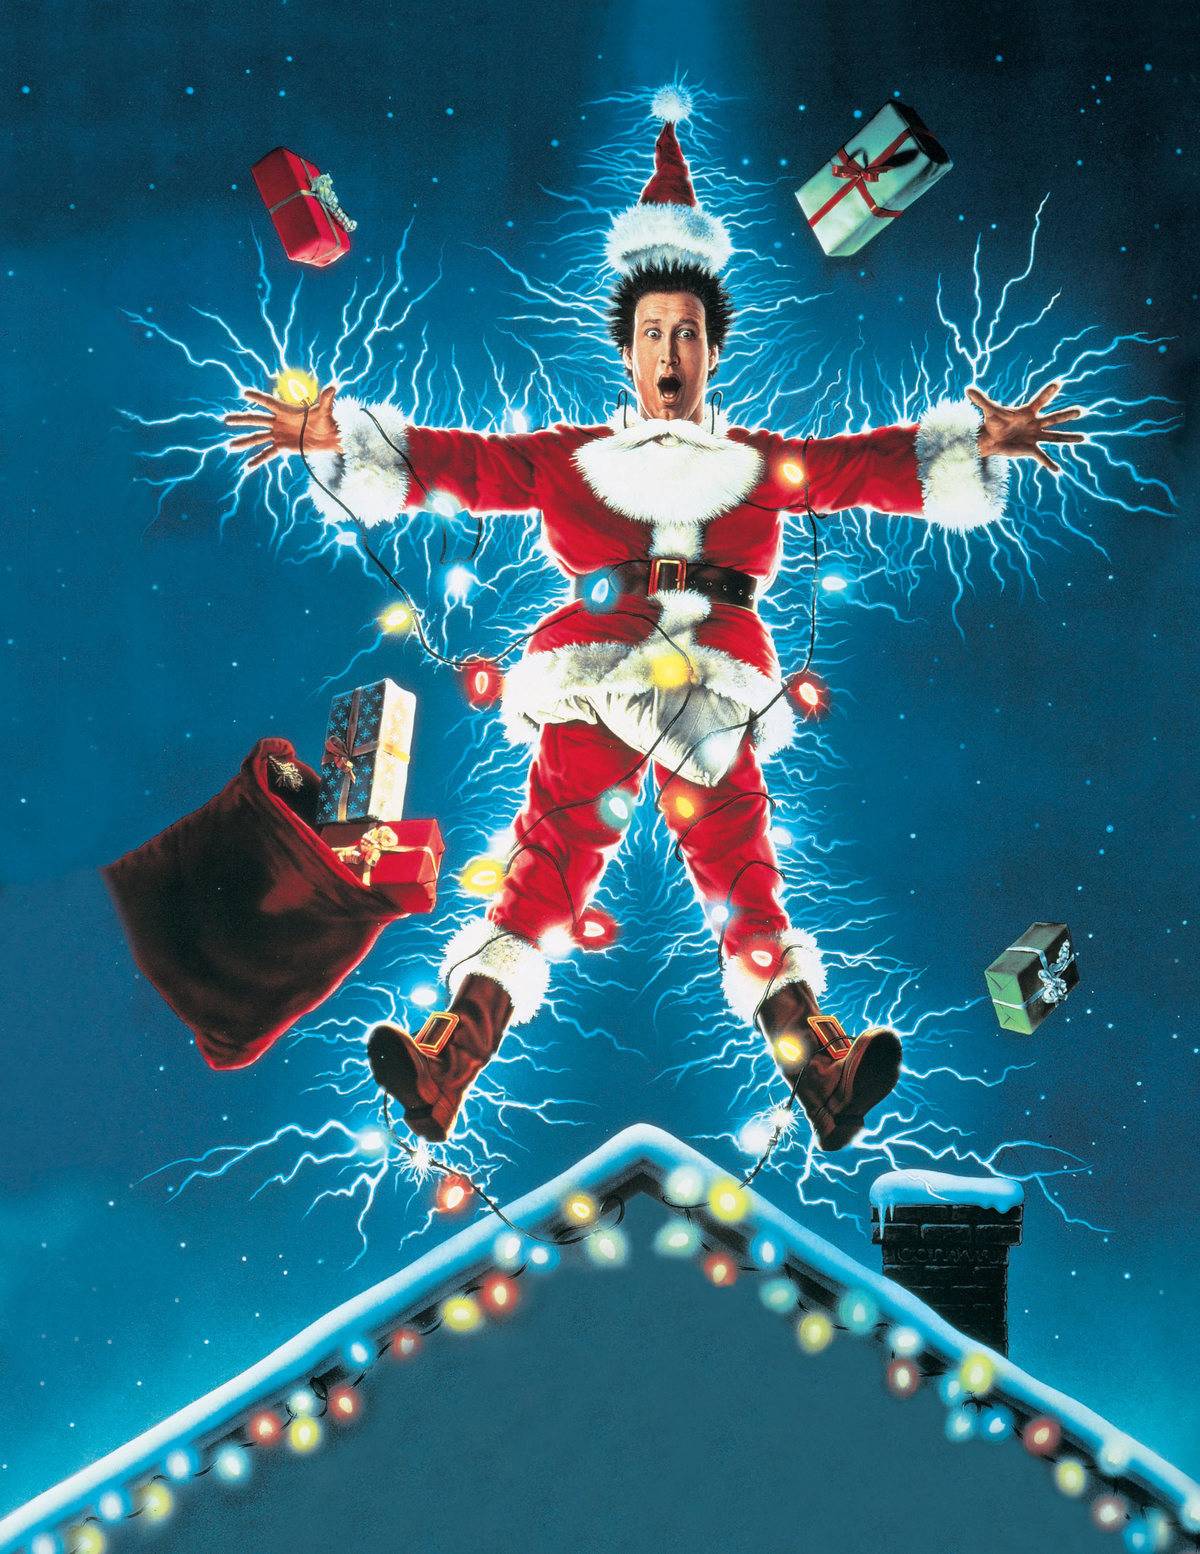 <p>In the United States, <i>Christmas Vacation</i> received a theatrical release on December 1st, 1989. It debuted at No. 2 in the box office and grossed over $11,750,000 in its opening weekend. However, the movie was not as popular overseas. </p> <p>In England, <i>Christmas Vacation</i> went straight to video. A bare-bones DVD came out in 1990, and in 2003, it came out on Blu-Ray. While the critical response was fairly positive in the U.S., international audiences were not as thrilled. It is amazing how much change a theatrical release can make. </p>